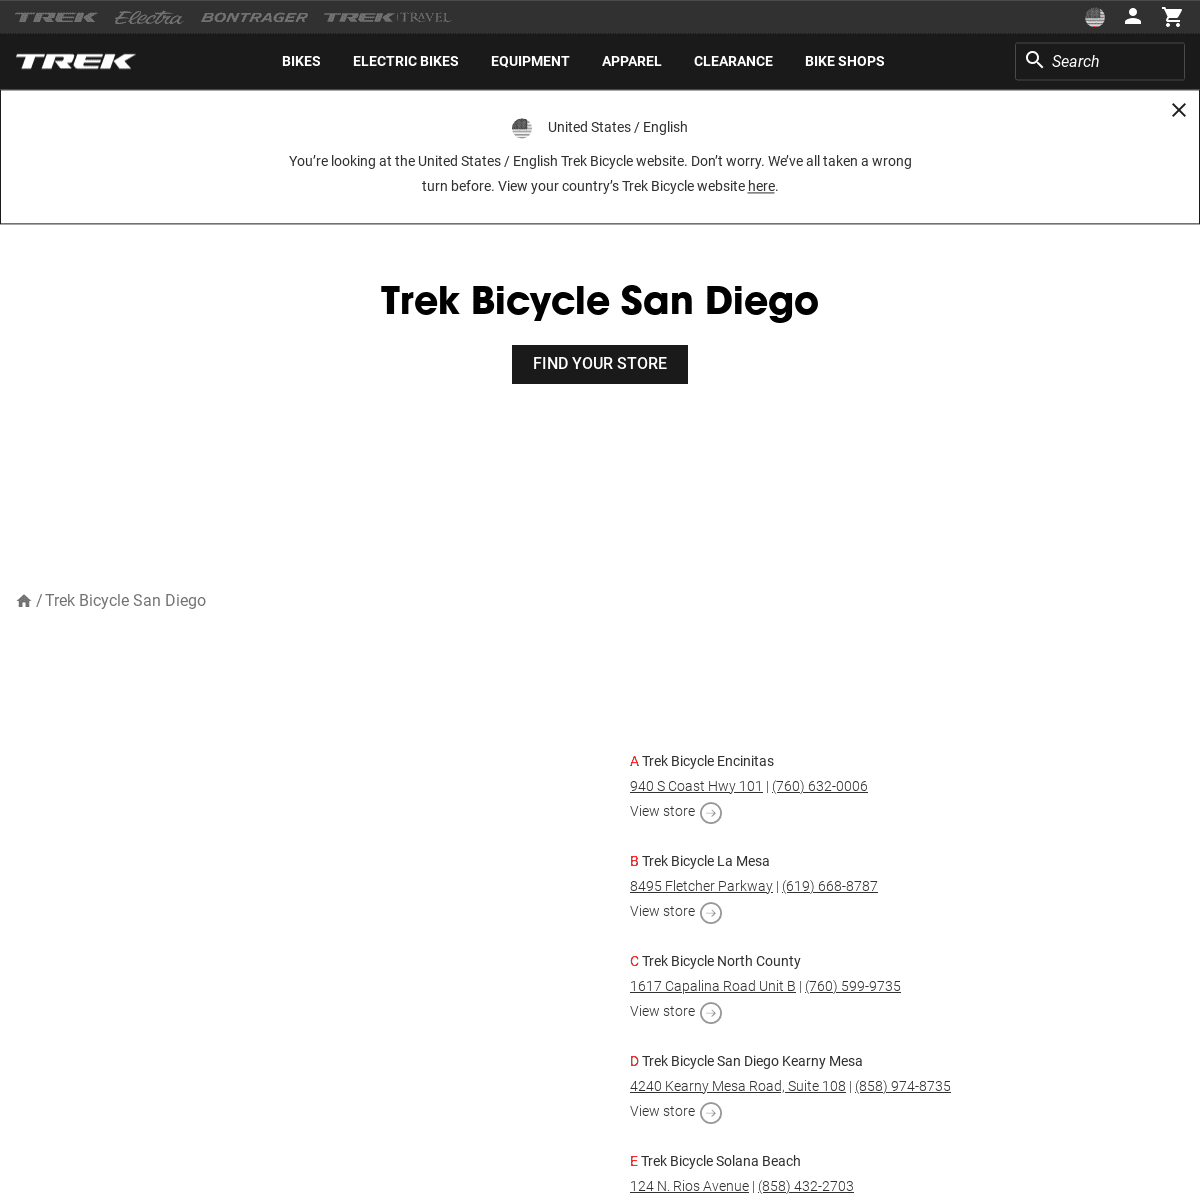 A complete backup of https://trekbicyclesuperstore.com